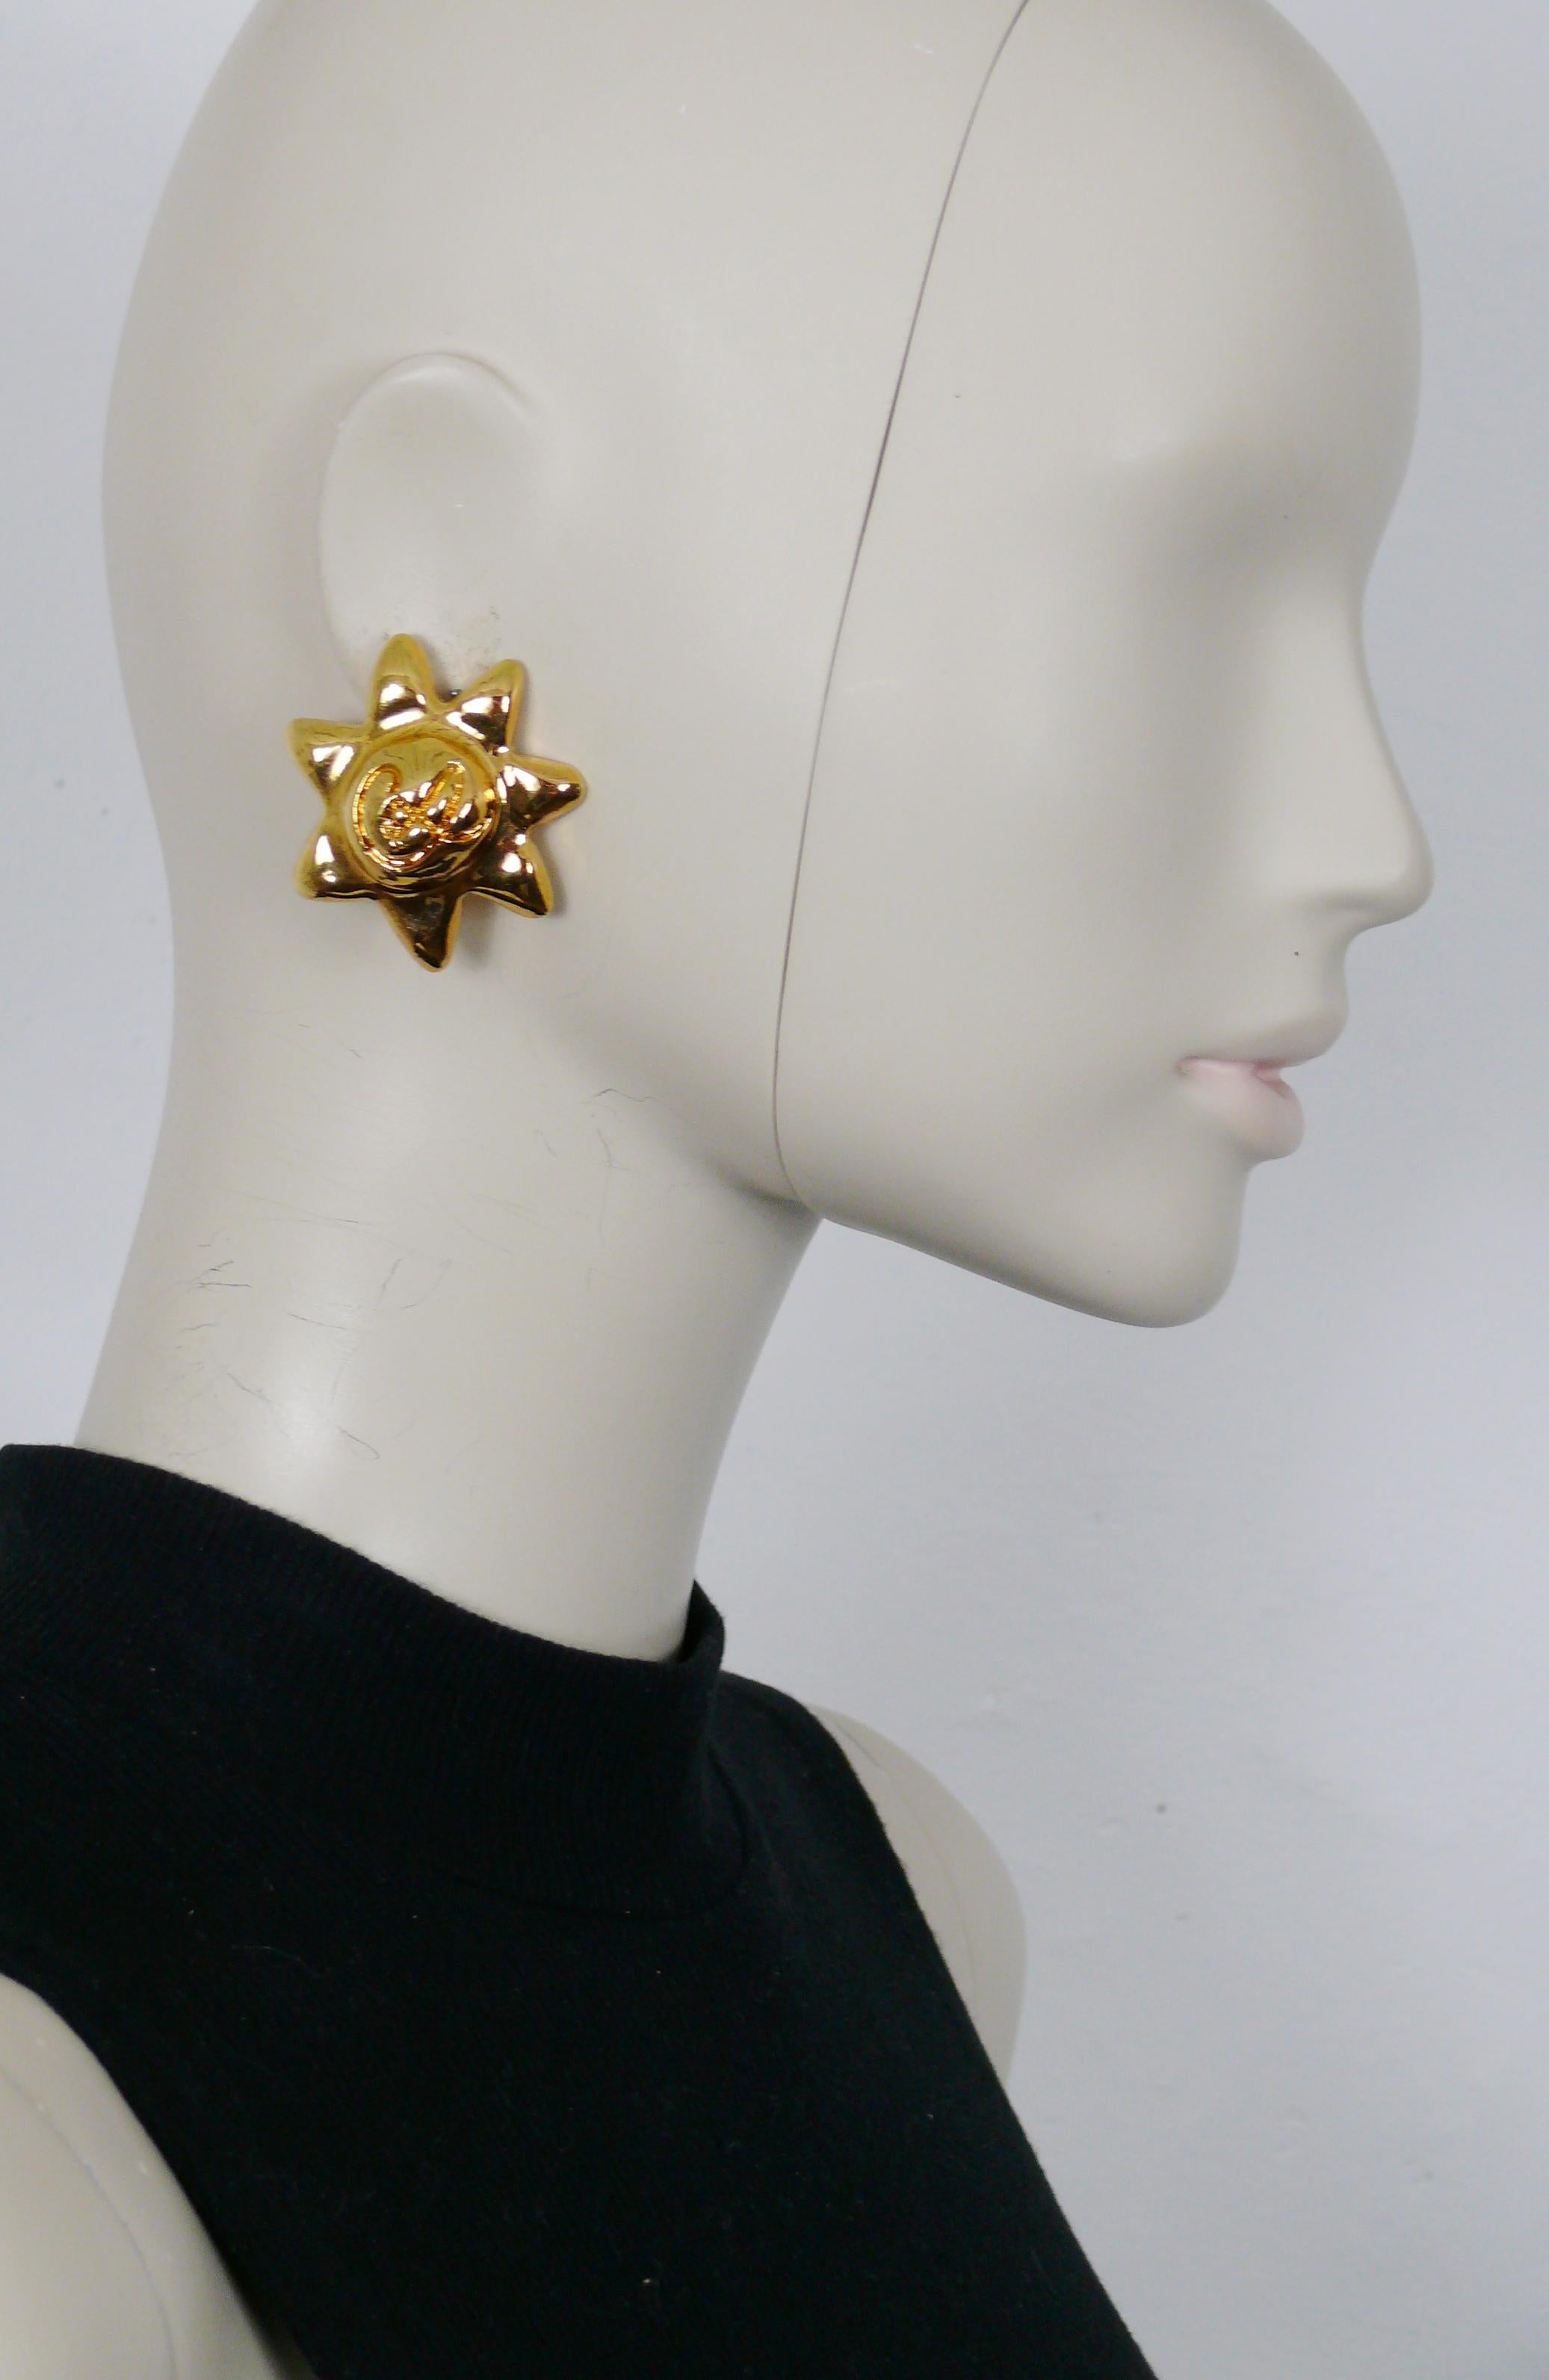 CHRISTIAN LACROIX vintage gold toned resin clip-on earrings featuring a sun embossed with the CL monogram at the center.

Marked CHRISTIAN LACROIX CL Made in France.

Indicative measurements : approx. 4.2 cm x 4.2 cm (1.65 inches x 1.65